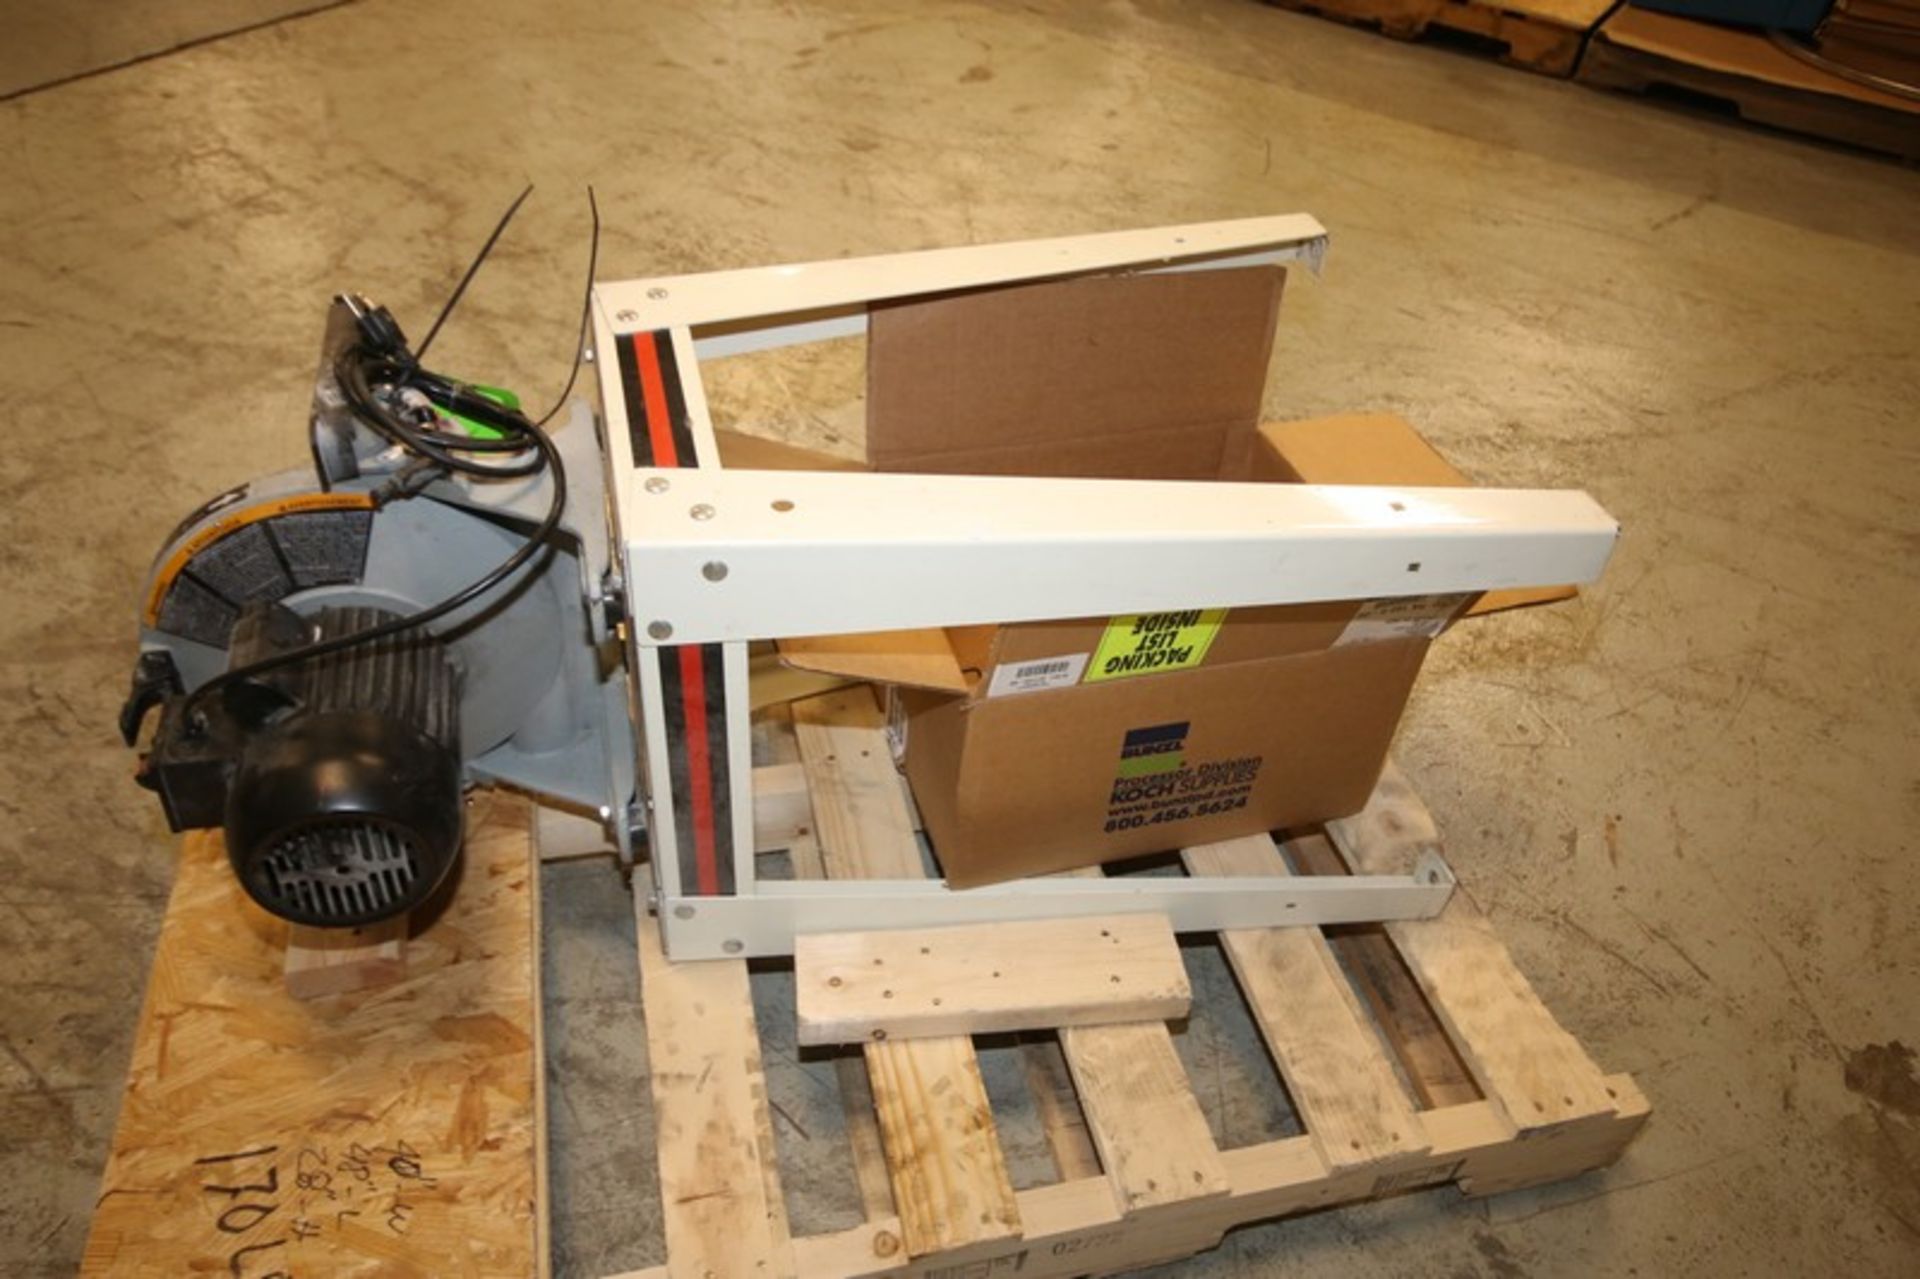 Delta 12" Disc Sander, Type 304164, 1/2 hp, 110V with Stand (INV#101685) (Located @ the MDG - Image 3 of 3